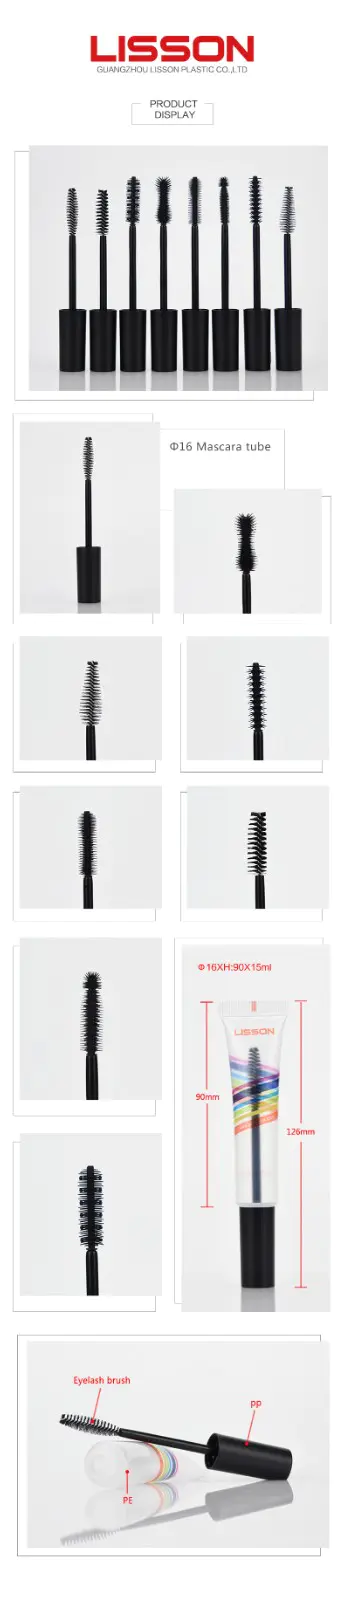 Lisson highly-rated empty mascara tube top brand for makeup